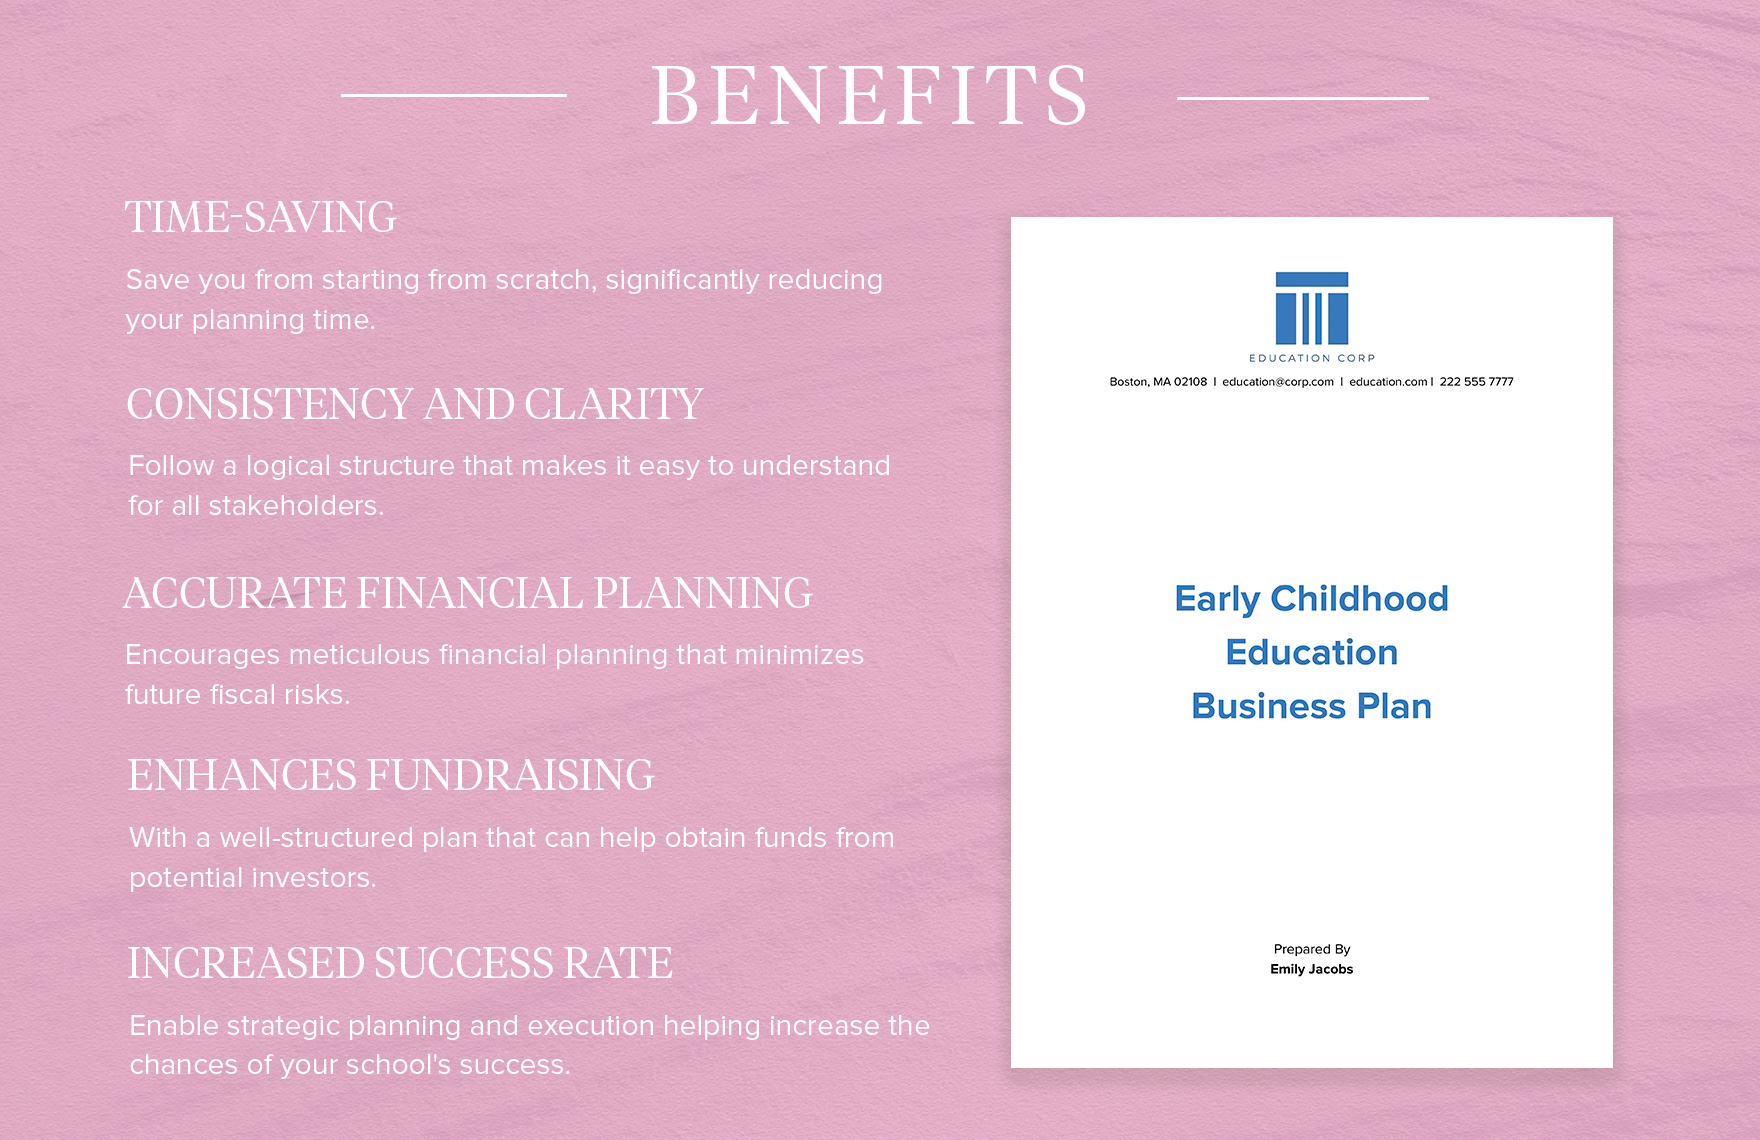 Early Childhood Education Business Plan Template